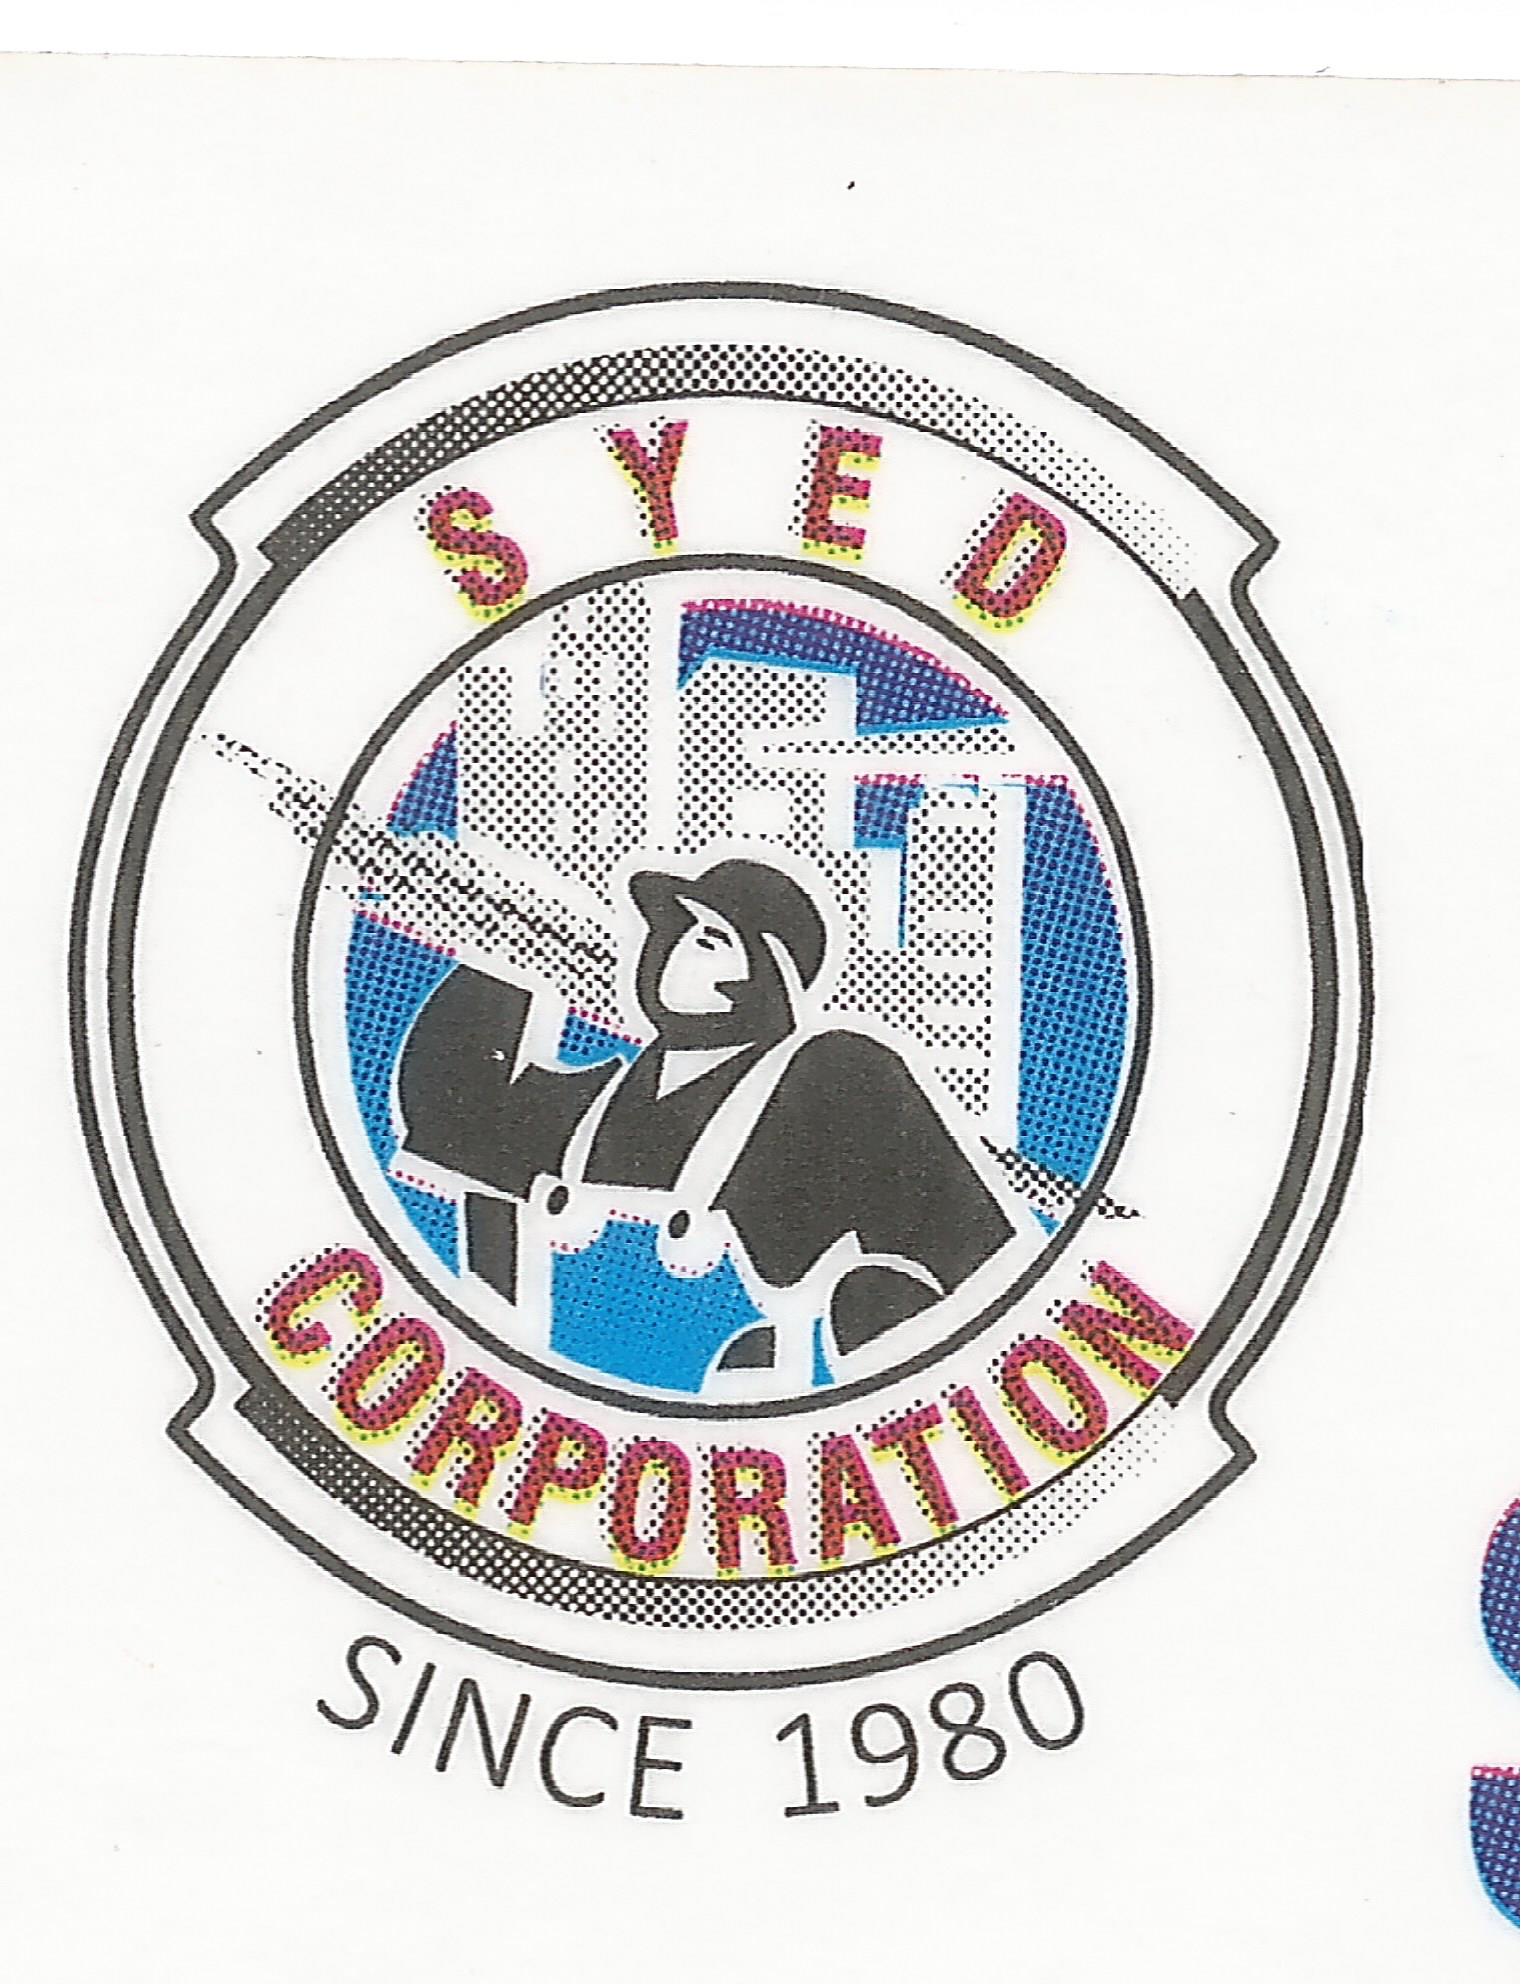 https://www.pakpositions.com/company/syed-corporation